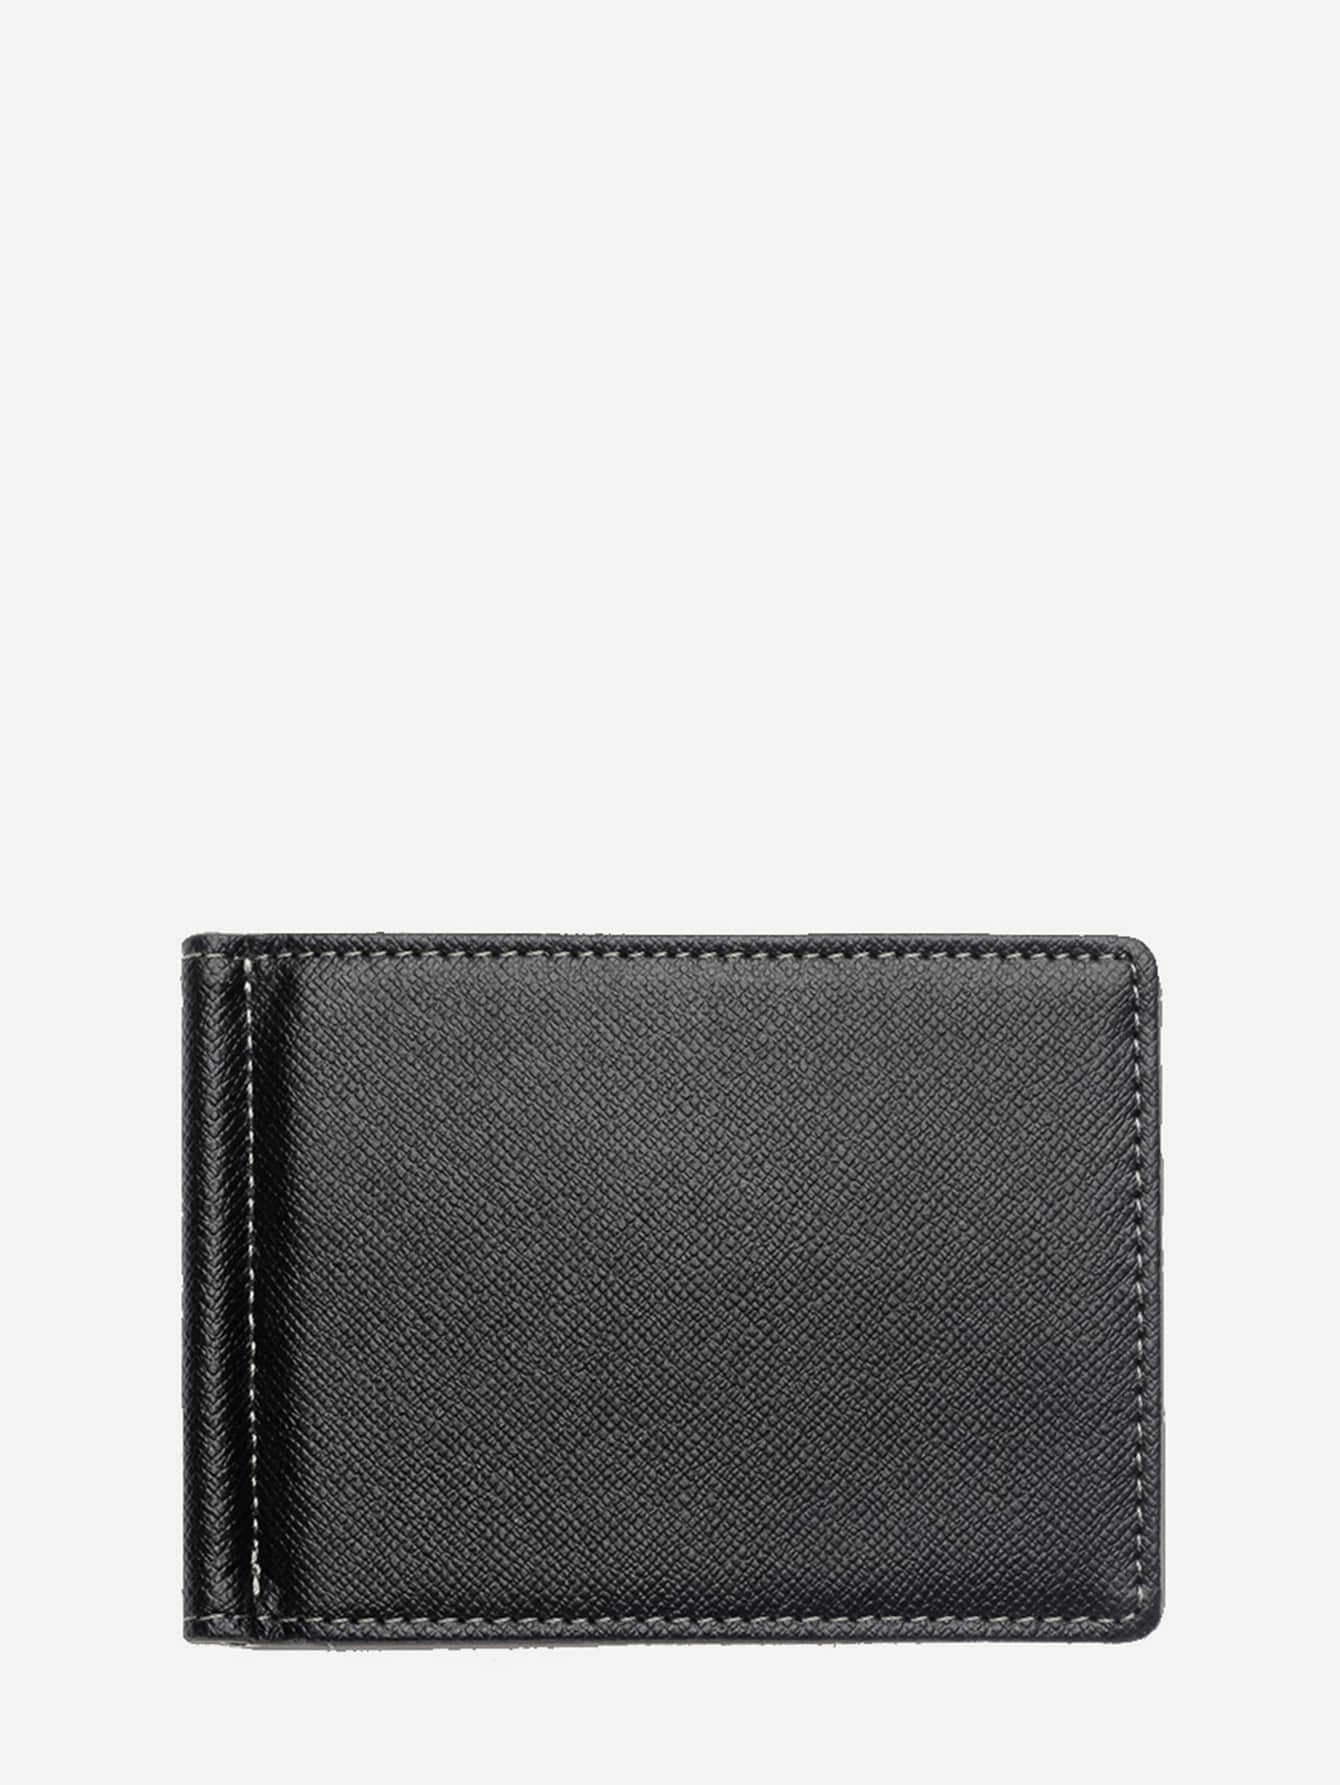 PU Leather Grey Fold Over Wallet With Card Holder